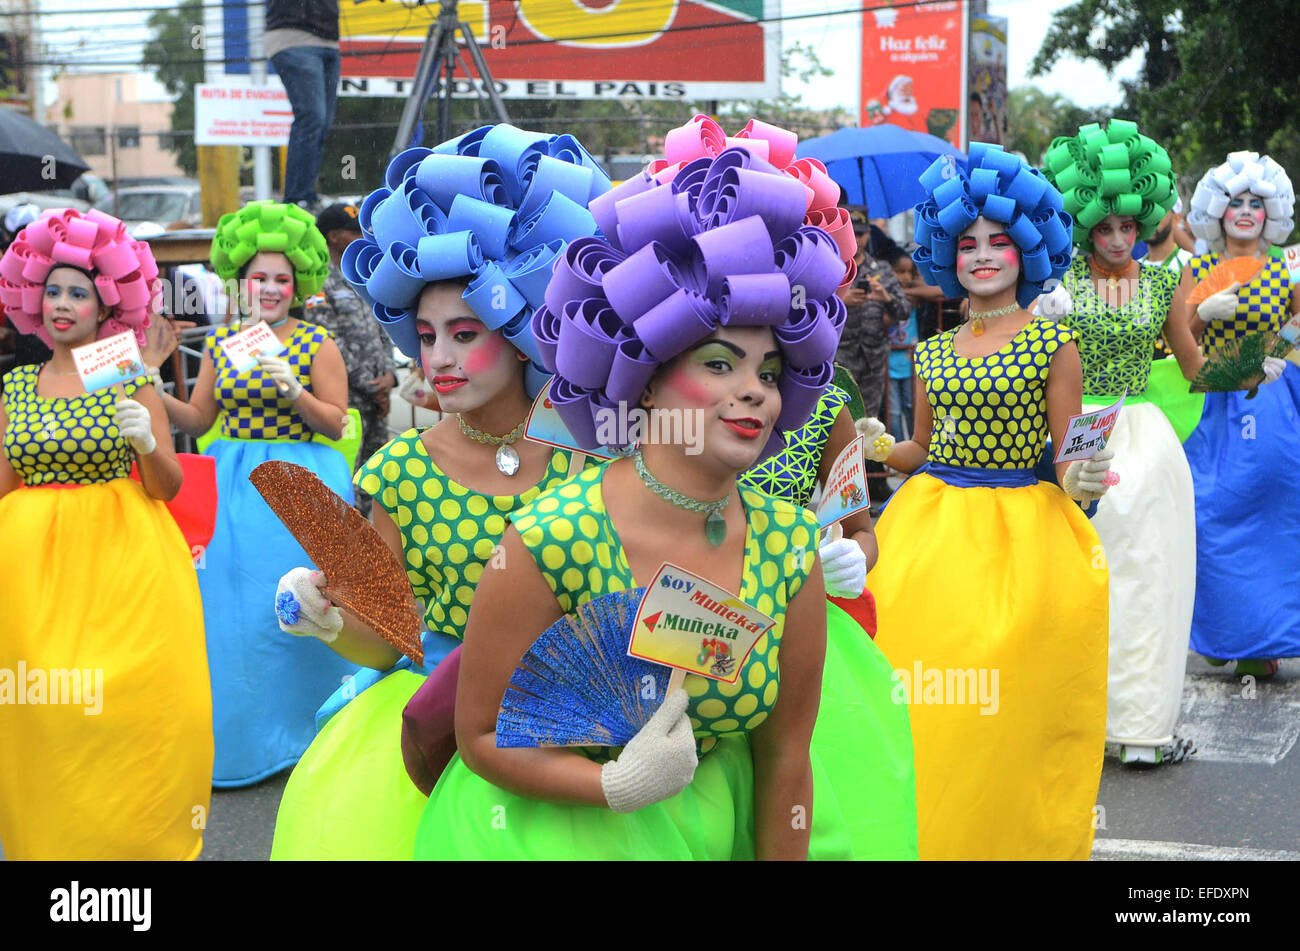 Santiago, Dominican Republic. 1st Feb, 2015. People participate in the Carnival parade, in Santiago province, Dominican Republic, on Feb. 1, 2015. According to the local press, the carnival begins on the first Sunday of February annually, as one of the most important cultural traditions of the country. © Onelio Dominguez/Xinhua/Alamy Live News Stock Photo